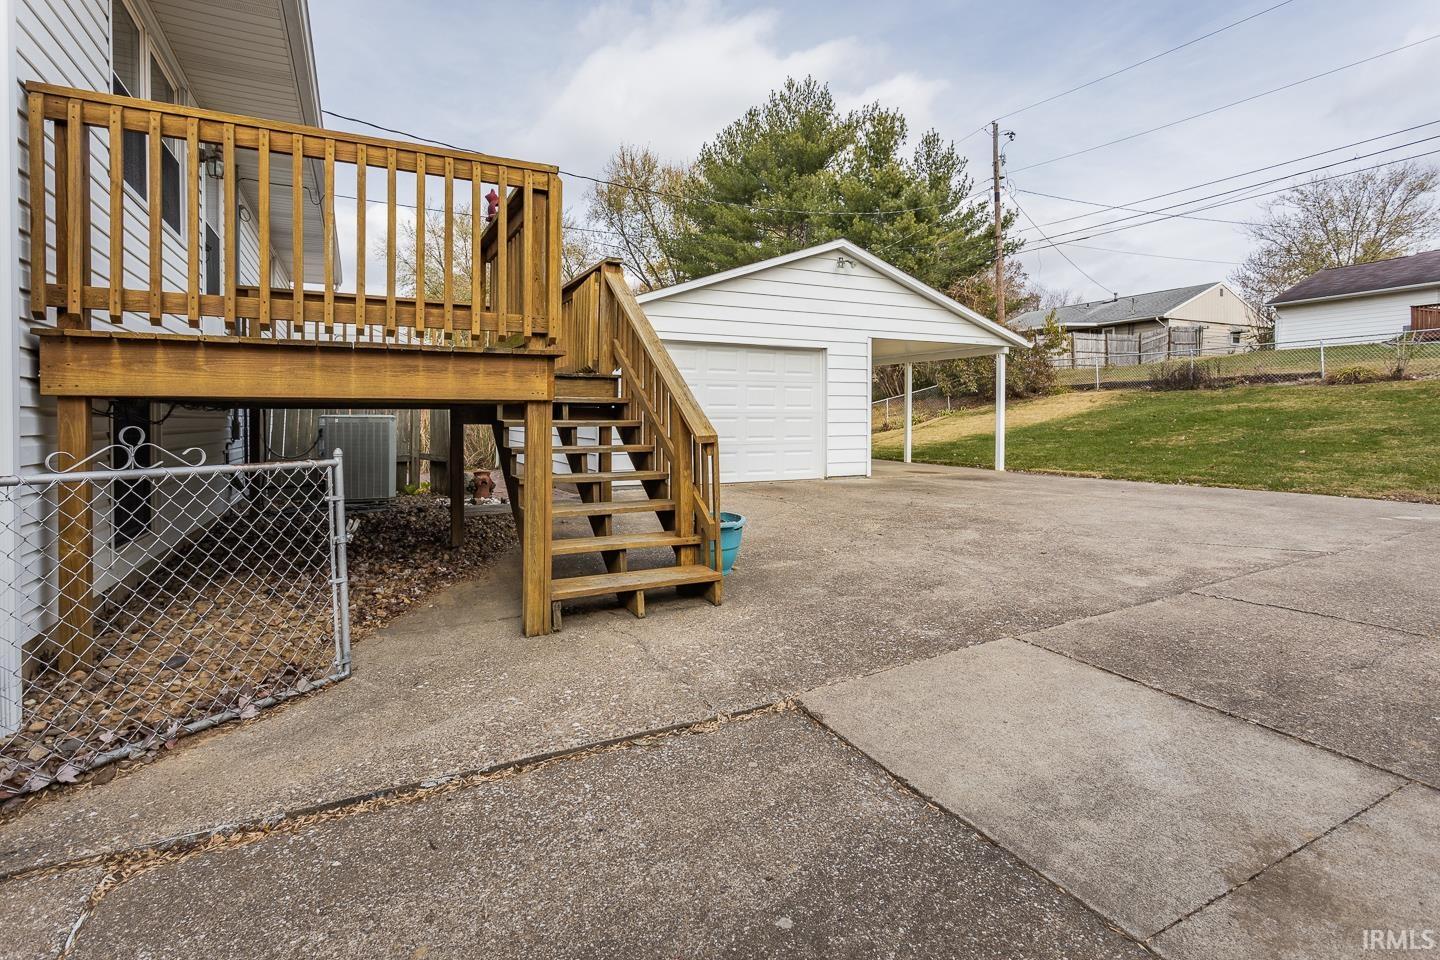 he Deck off the back of the home is a pleasant place to enjoy the quiet, fully fenced backyard, and there is a little private tucked-away patio area between the garage and home.